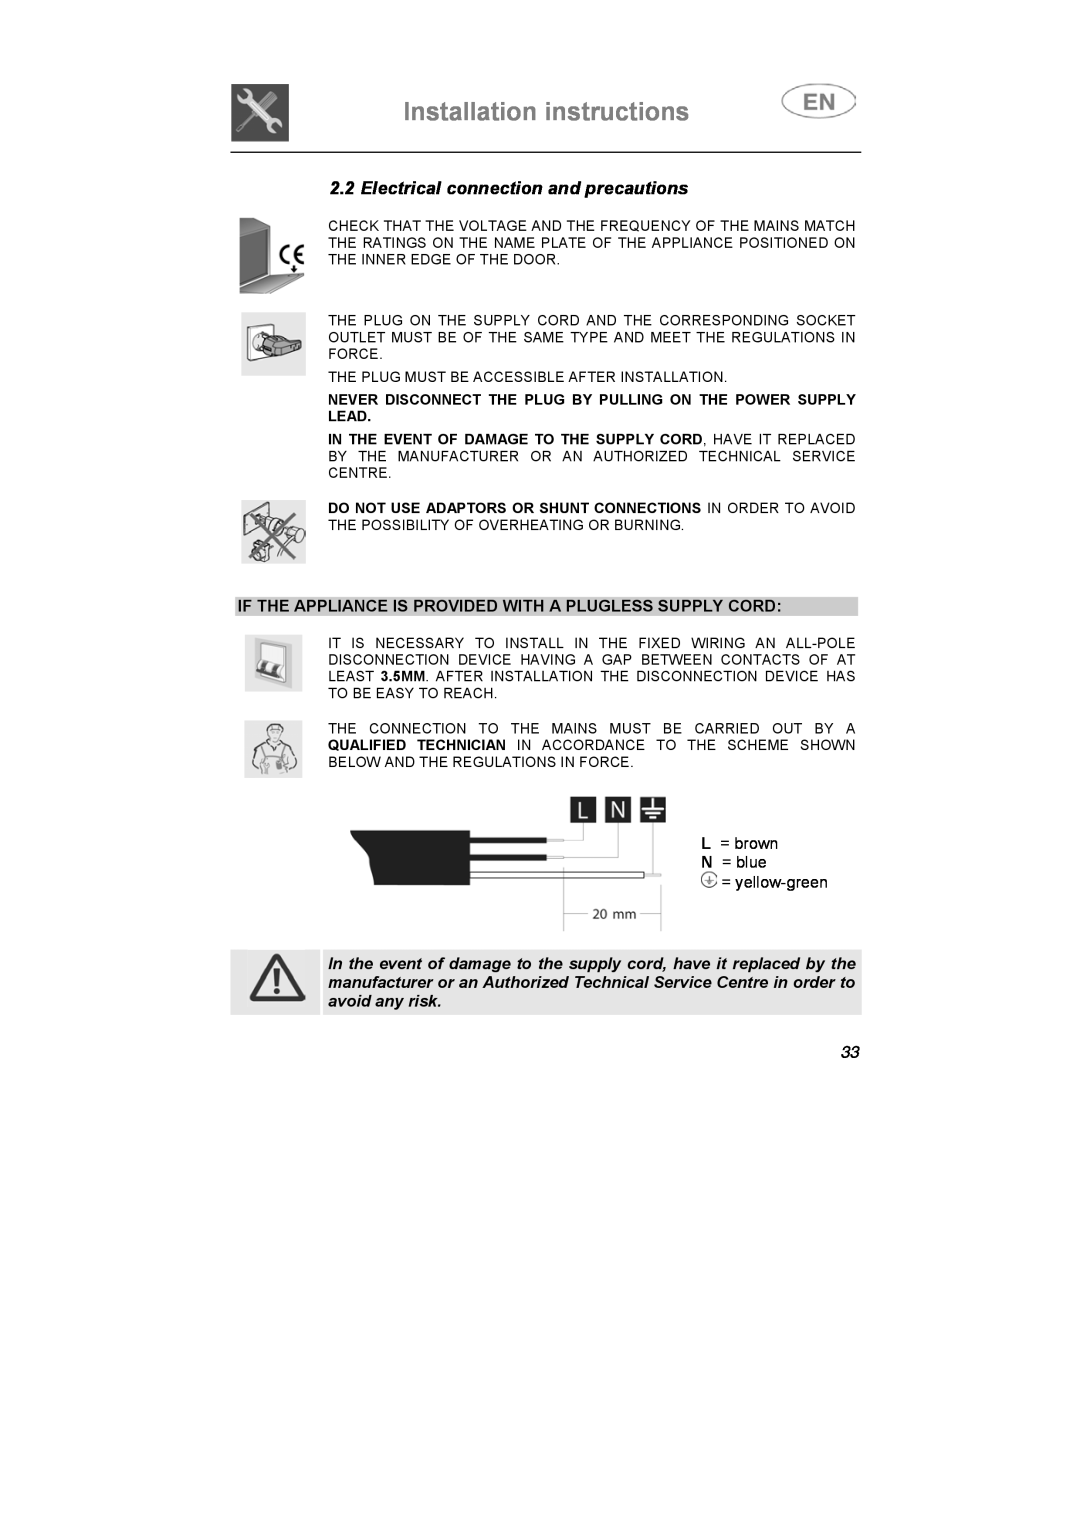 Smeg LS6147XH7 instruction manual Installation instructions, Electrical connection and precautions 